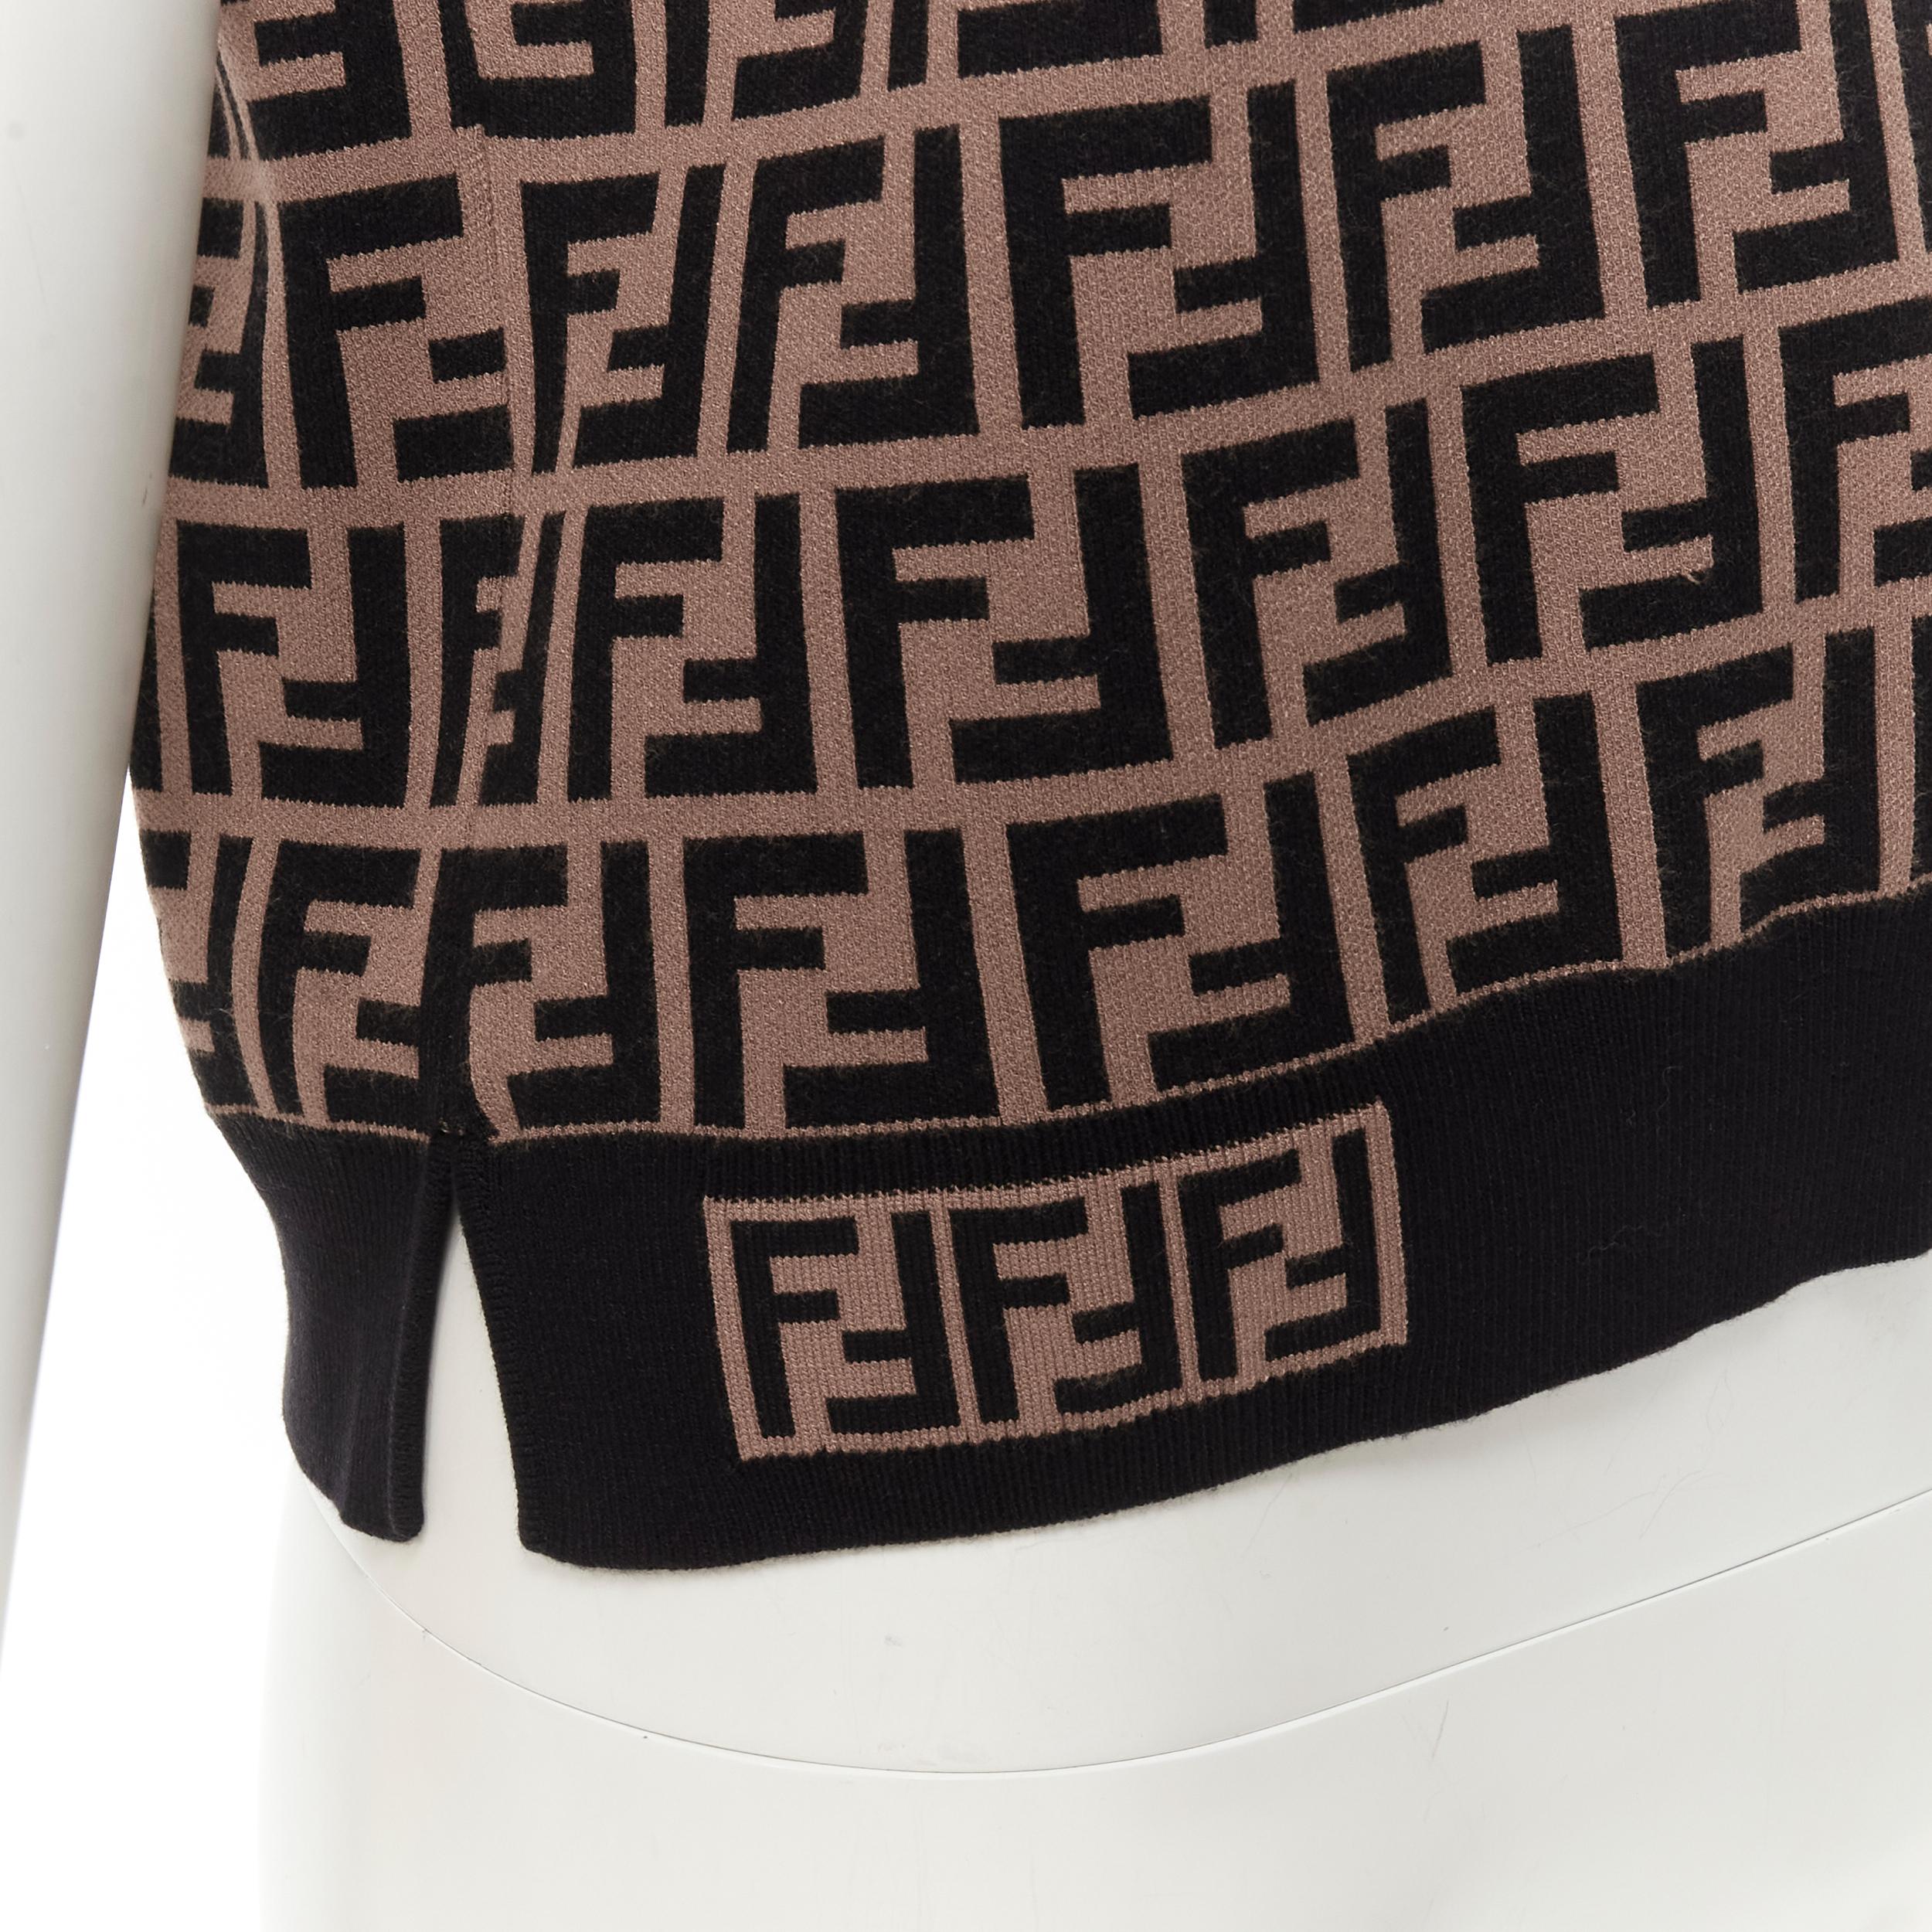 FENDI Signature FF Zucca monogram intarsia knit sweater top IT44 M
Brand: Fendi
Material: Viscose
Color: Brown
Pattern: Solid
Made in: Italy

CONDITION:
Condition: Excellent, this item was pre-owned and is in excellent condition. 

SIZING:
Designer